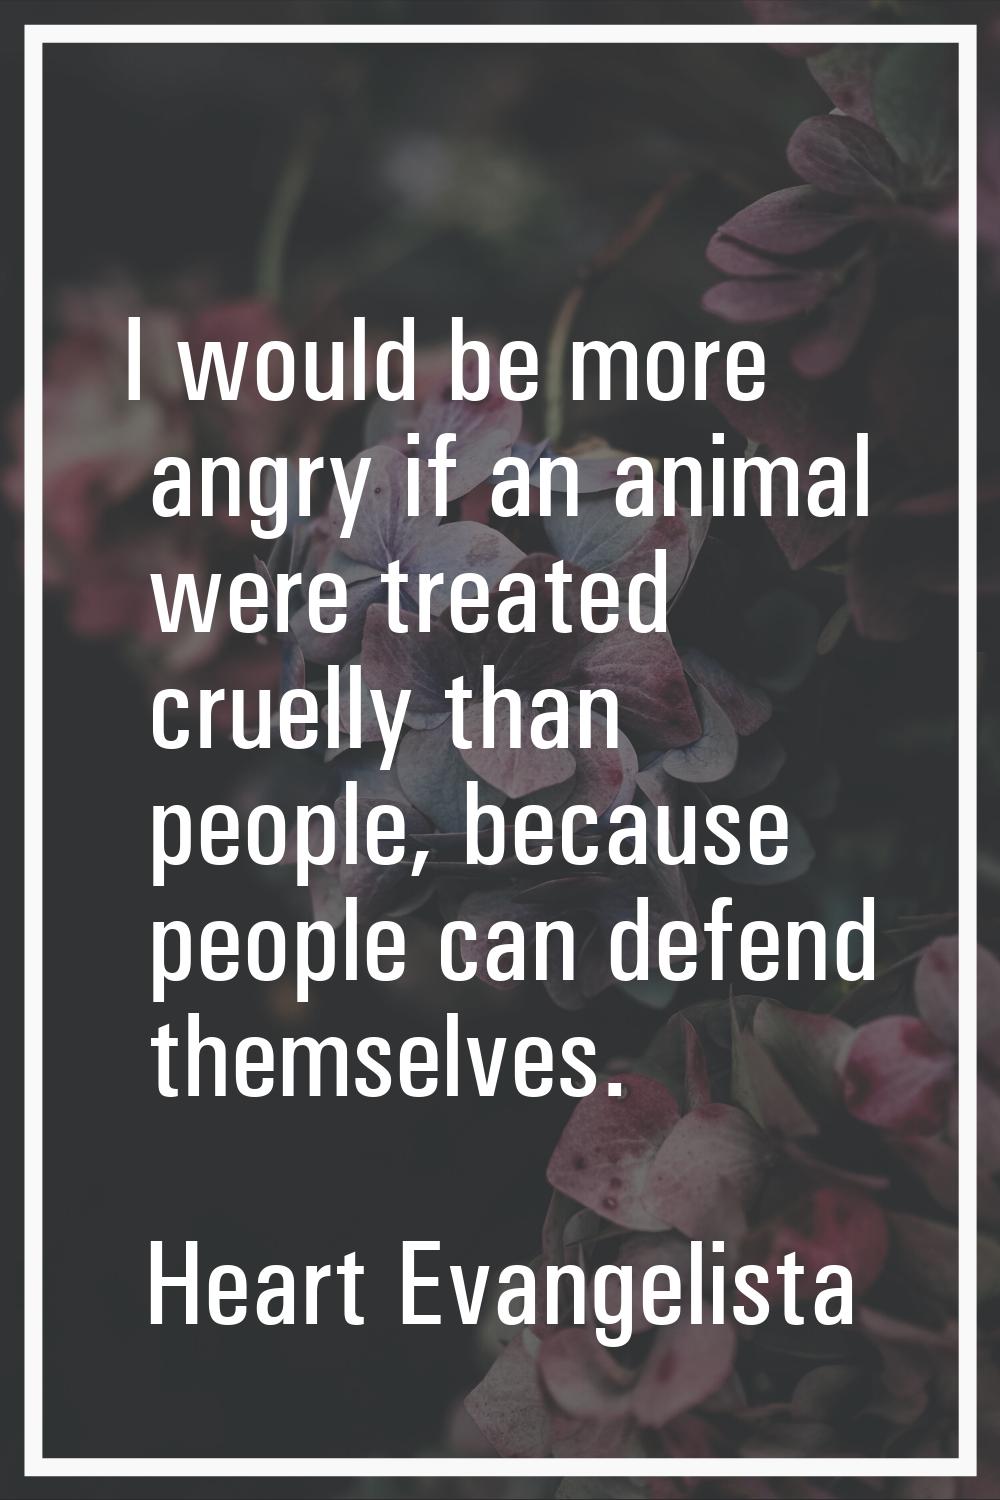 I would be more angry if an animal were treated cruelly than people, because people can defend them